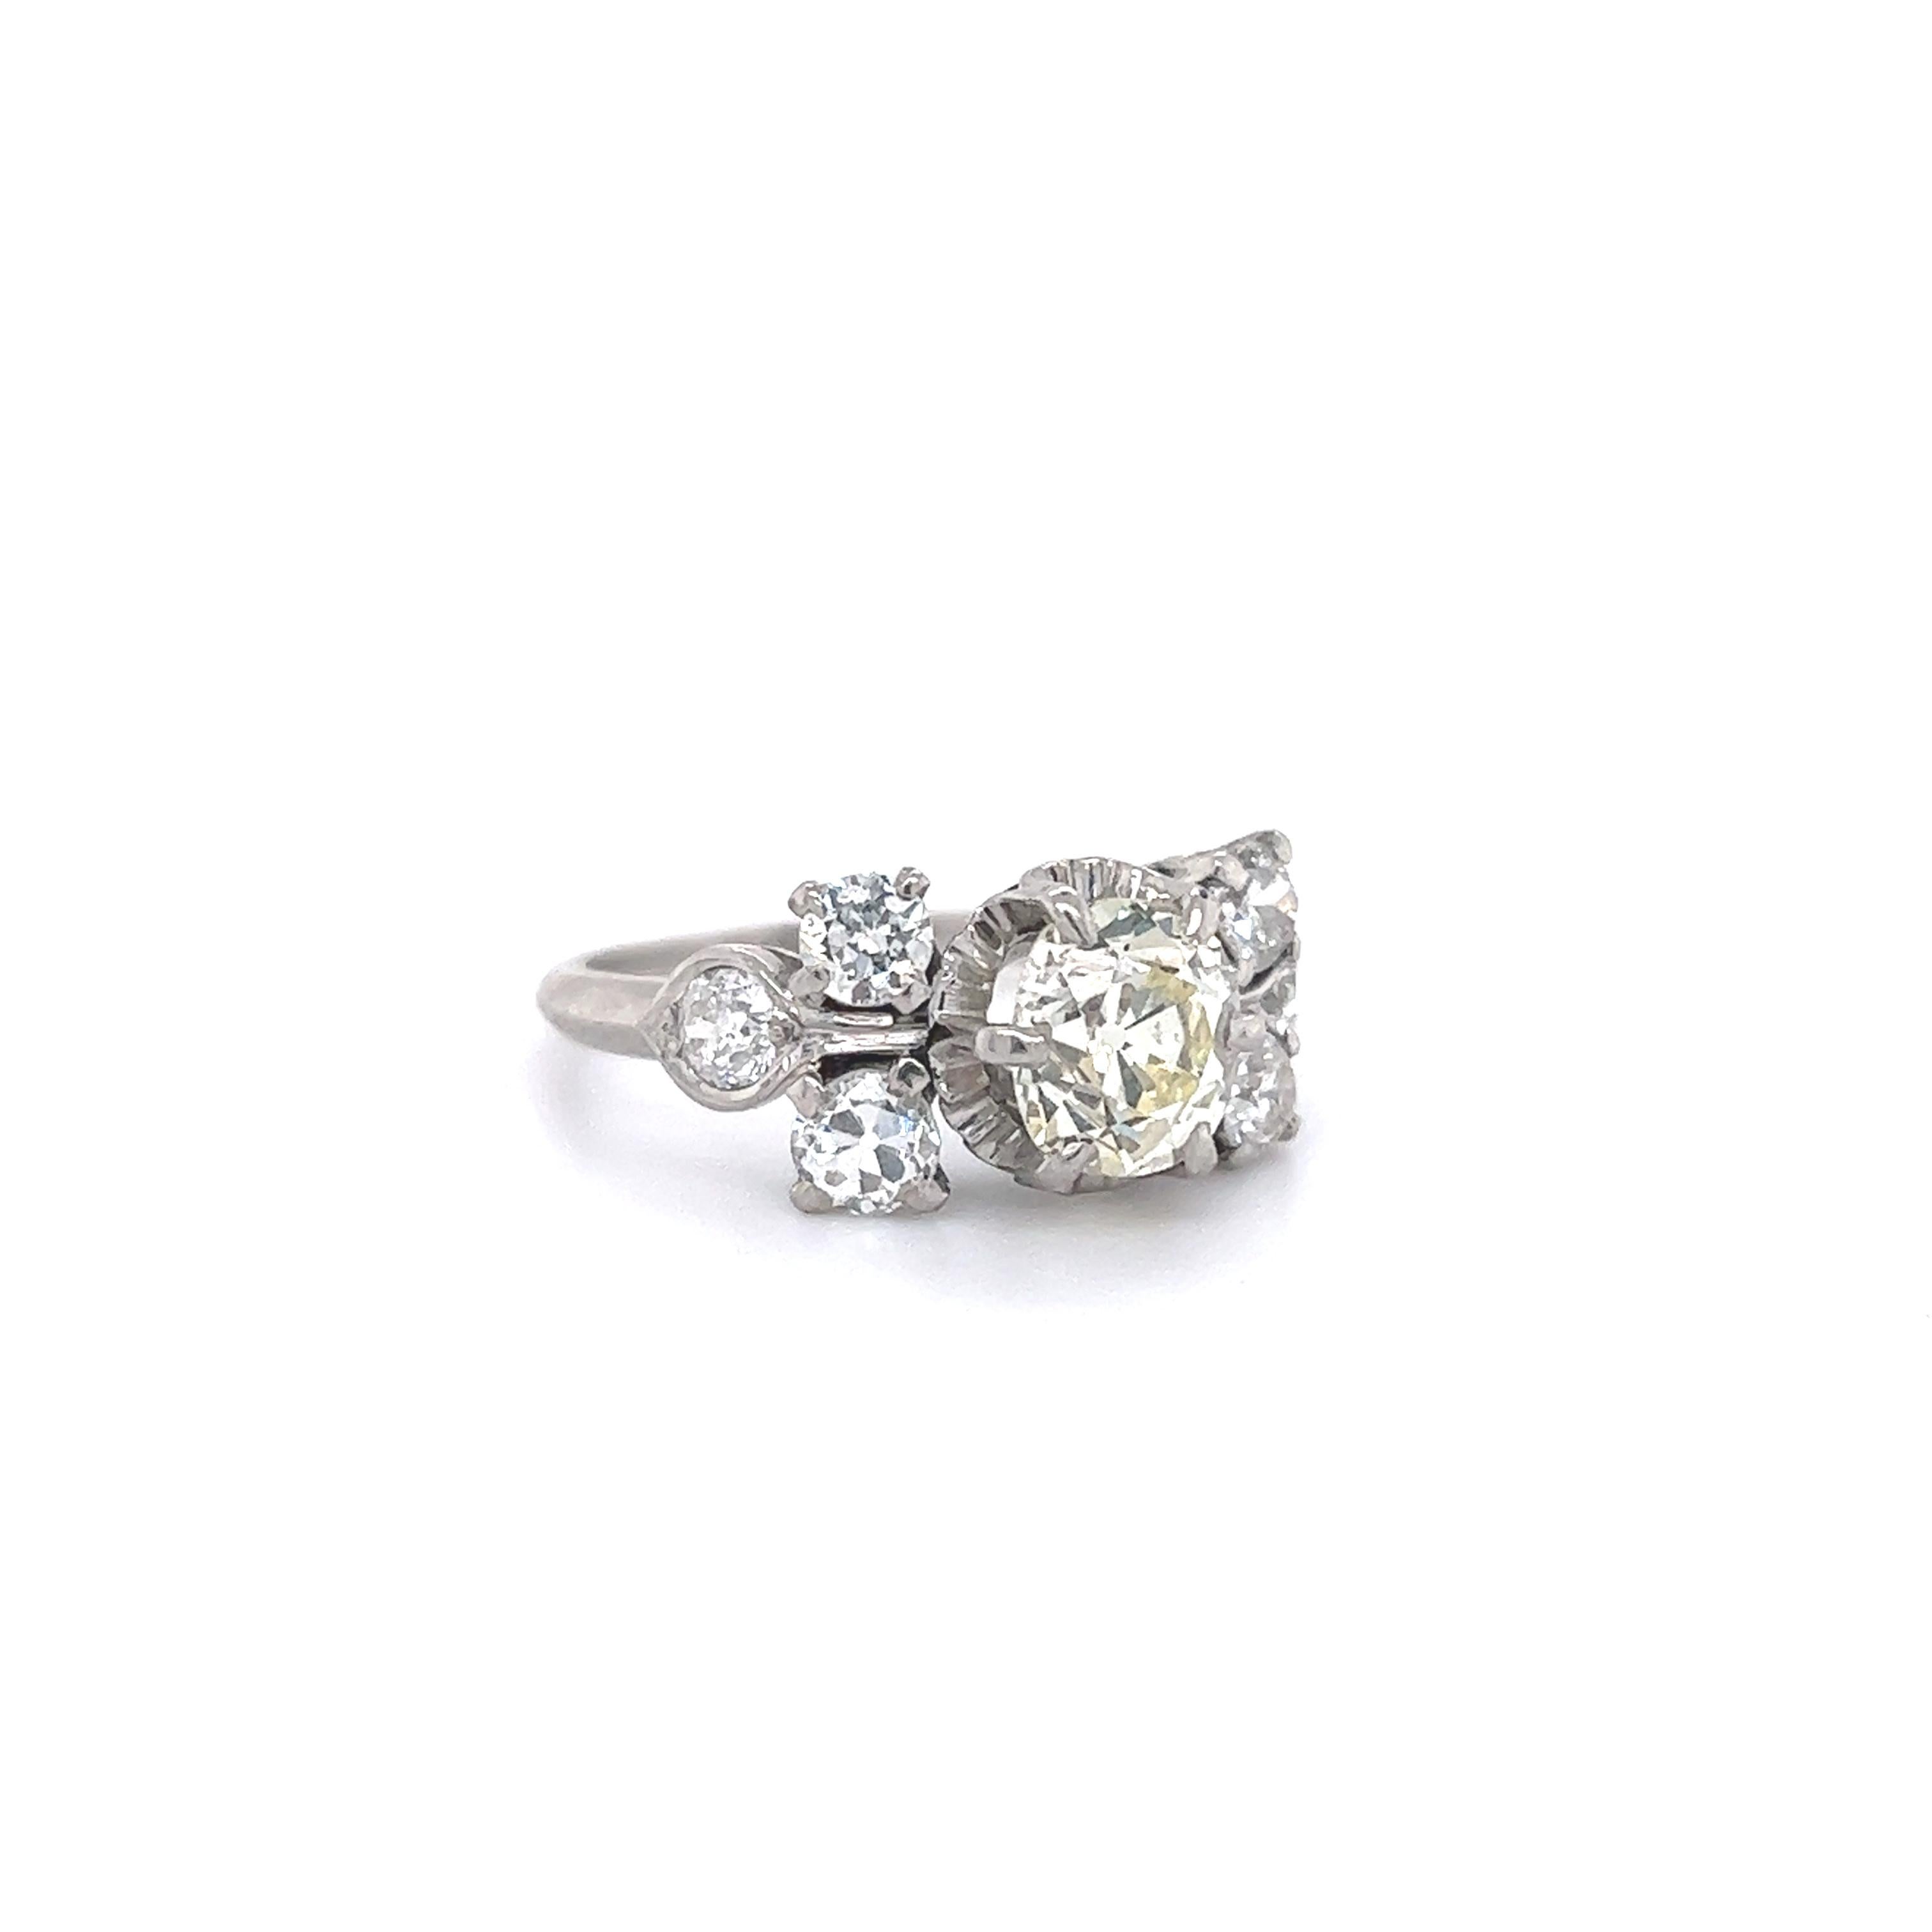 Beautiful hand crafted platinum ring. The ring is from the Edwardian era and is as breathtaking today as it was 120 years ago! The ring is highlighted with one vintage cushion mined brilliant center diamond. The diamond in the design weighs